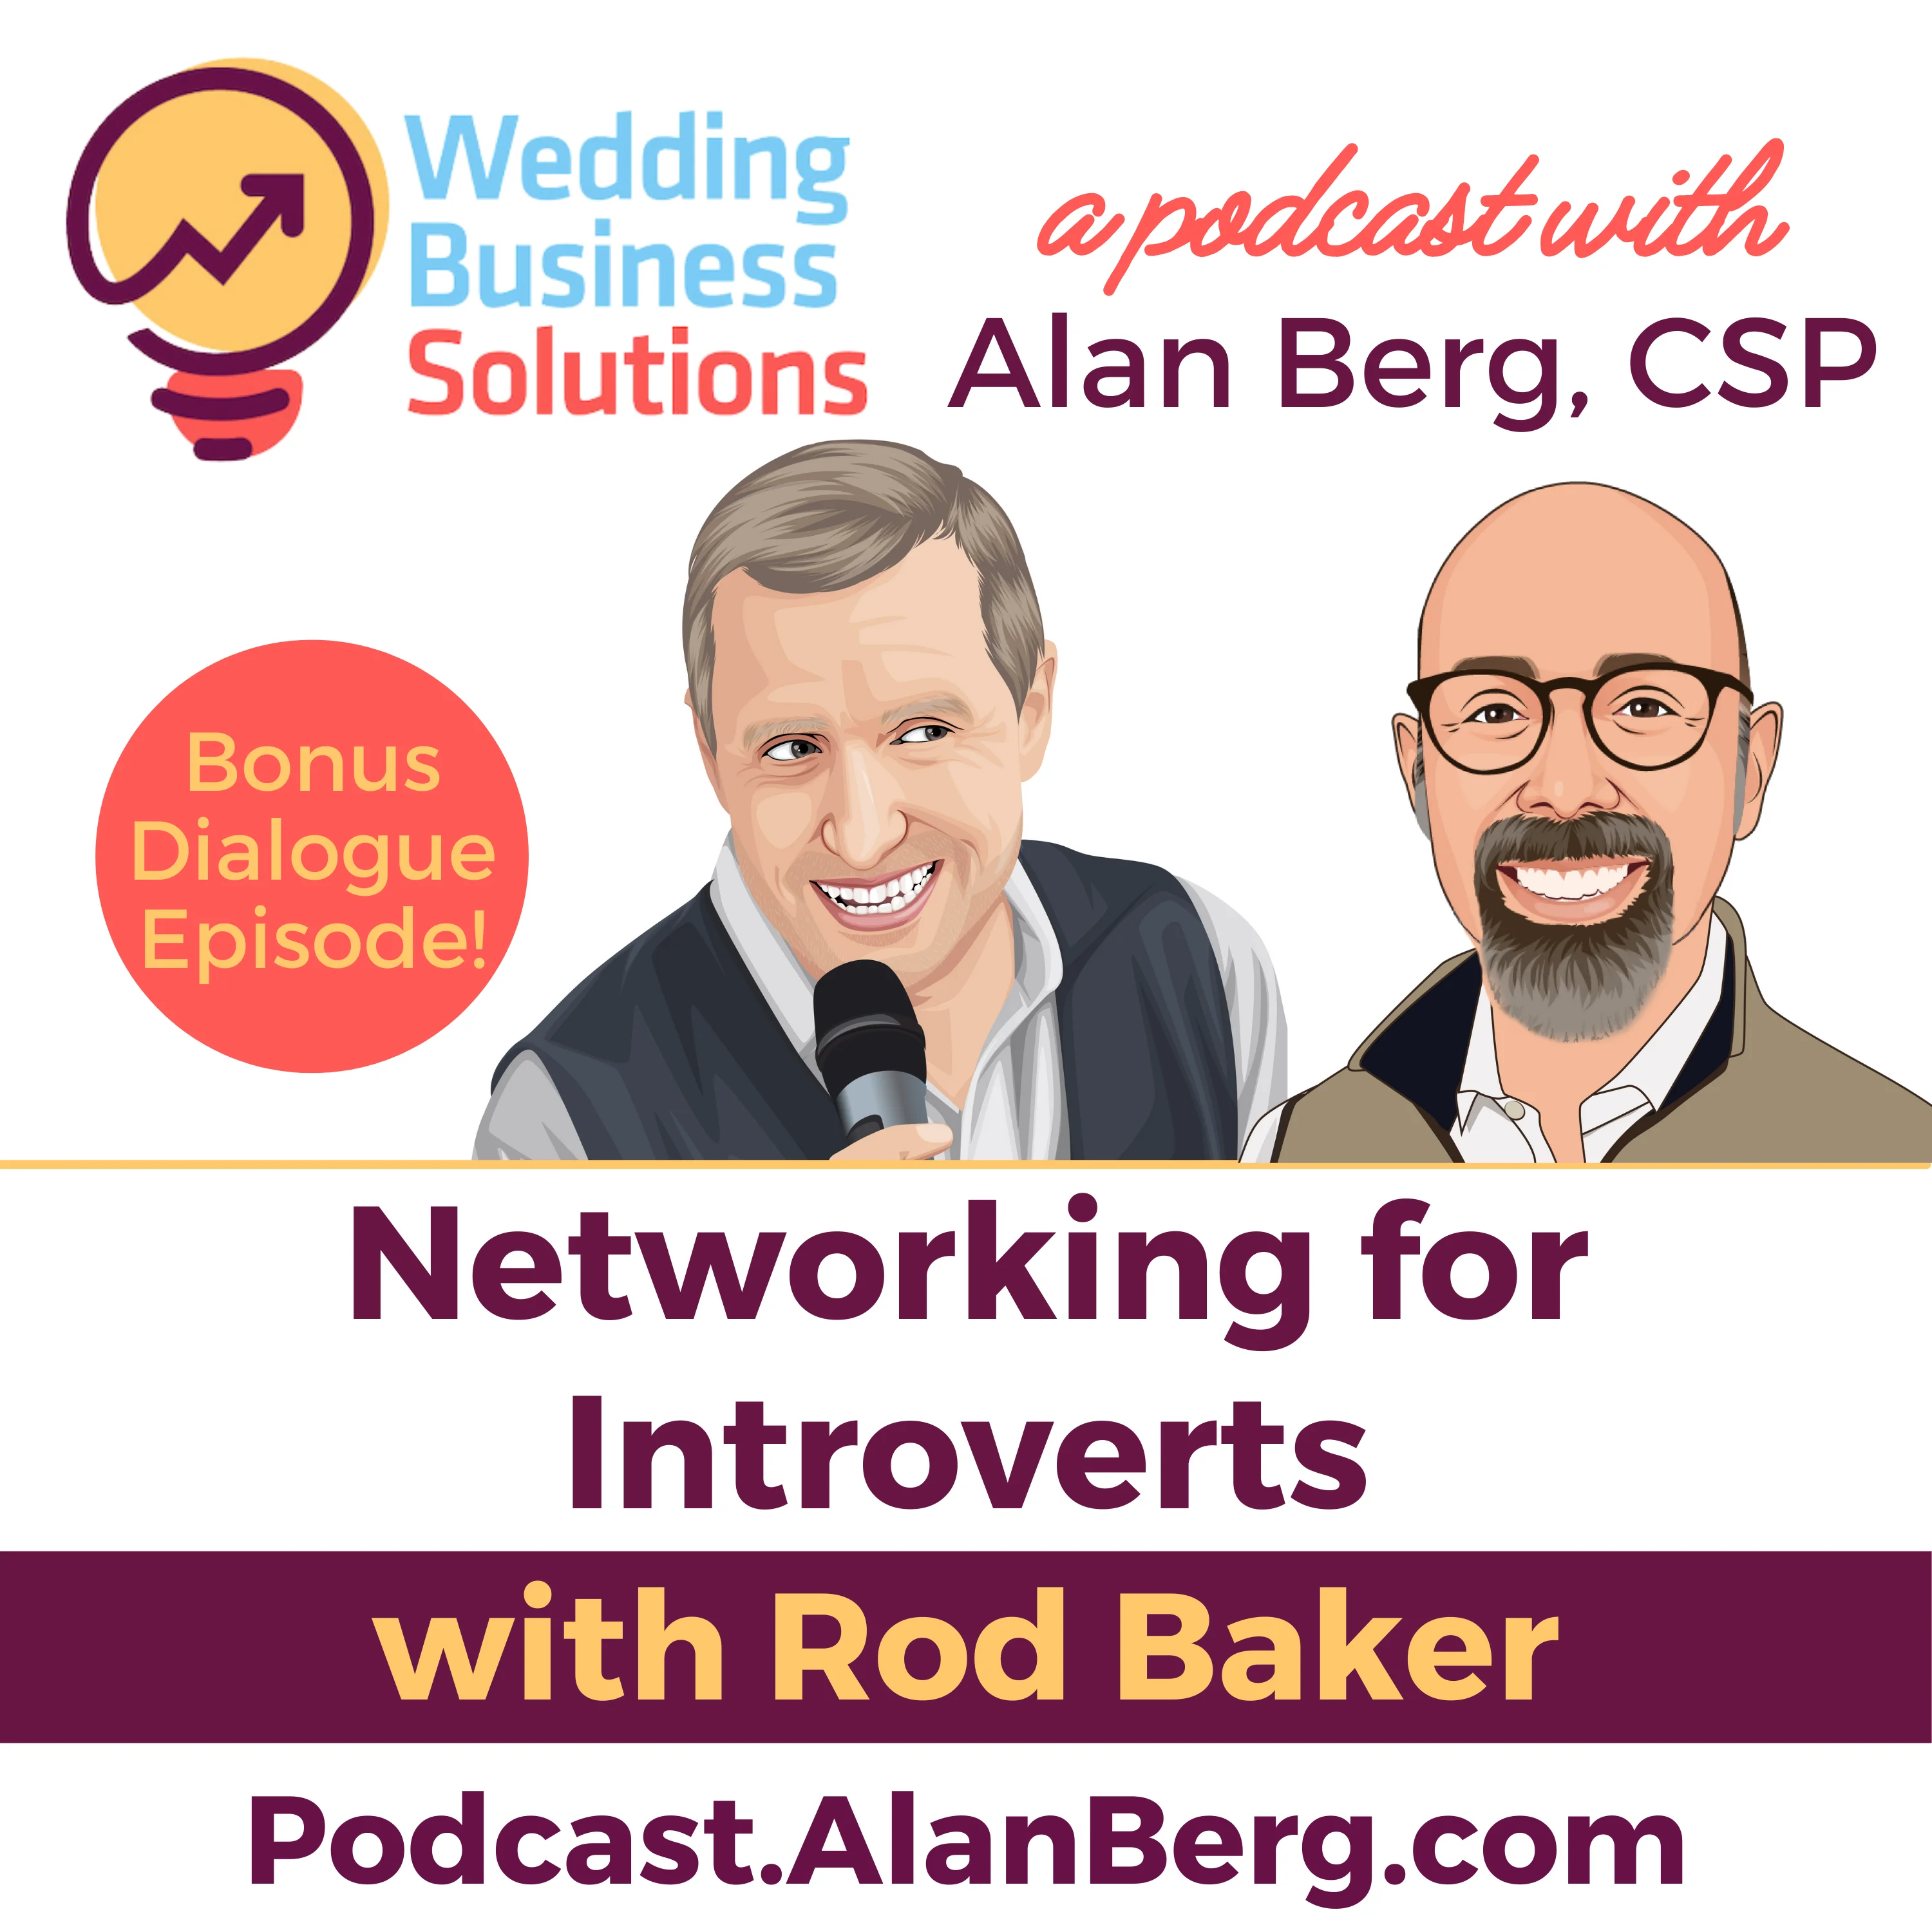 Rod Baker – Networking for Introverts – Podcast Transcript